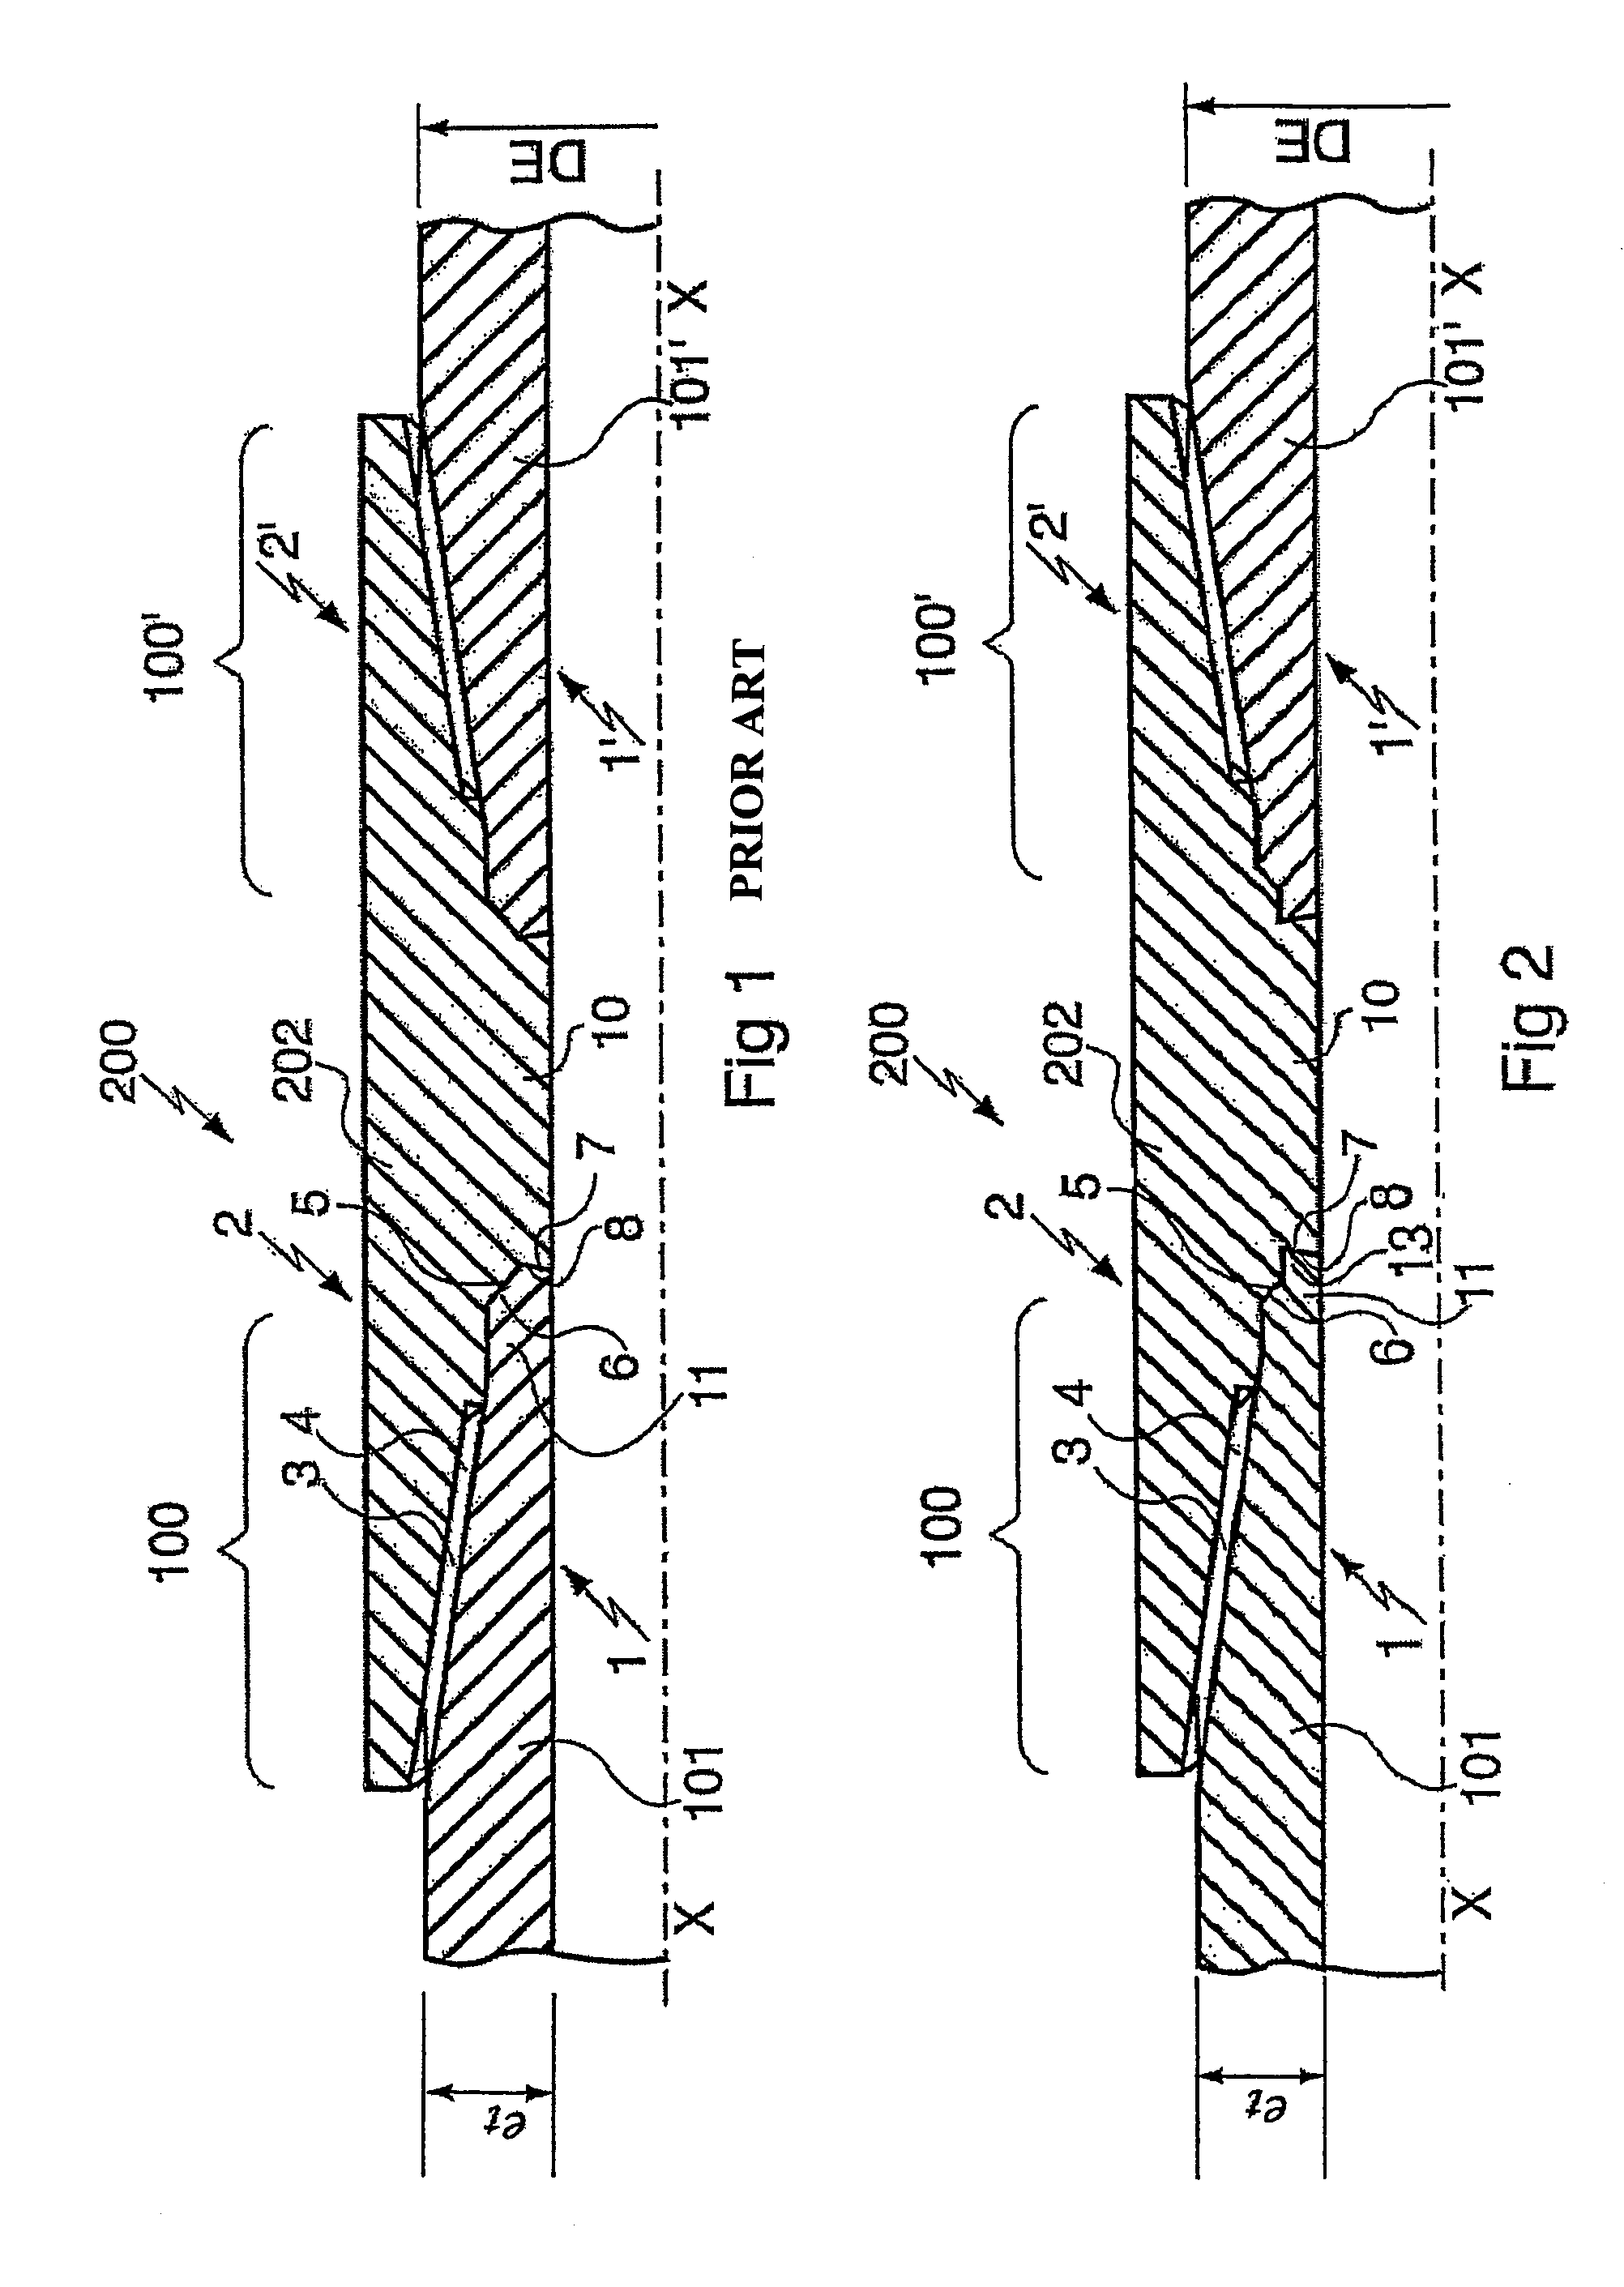 Premium threaded tubular joint comprising at least a threaded element with end lip